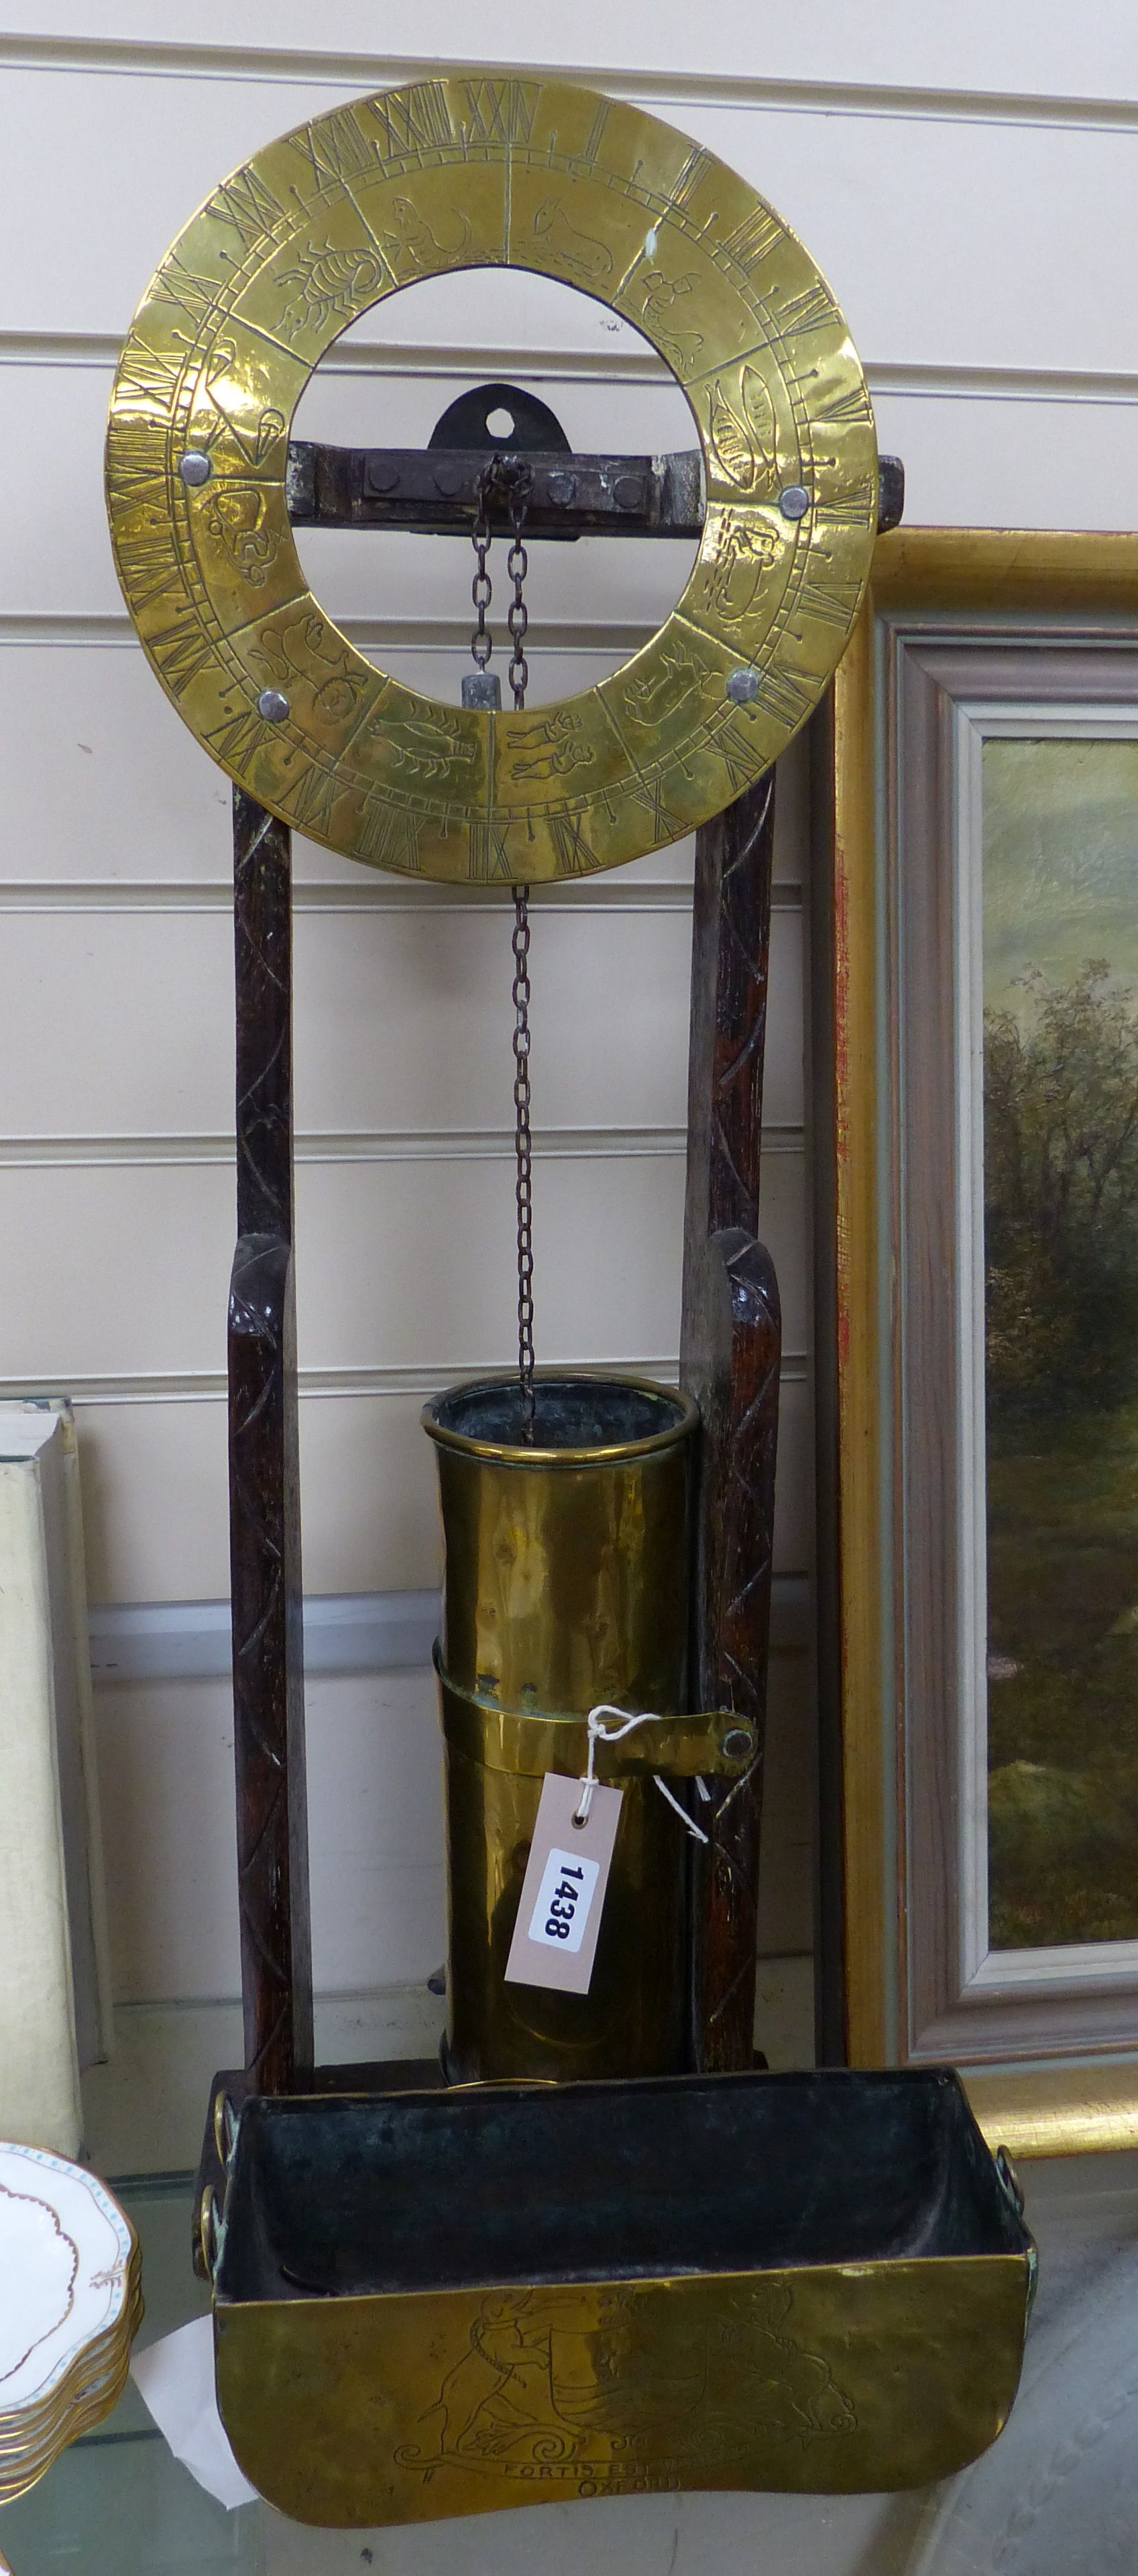 A 17th century style oak and brass 'Clepsydra' or water clock